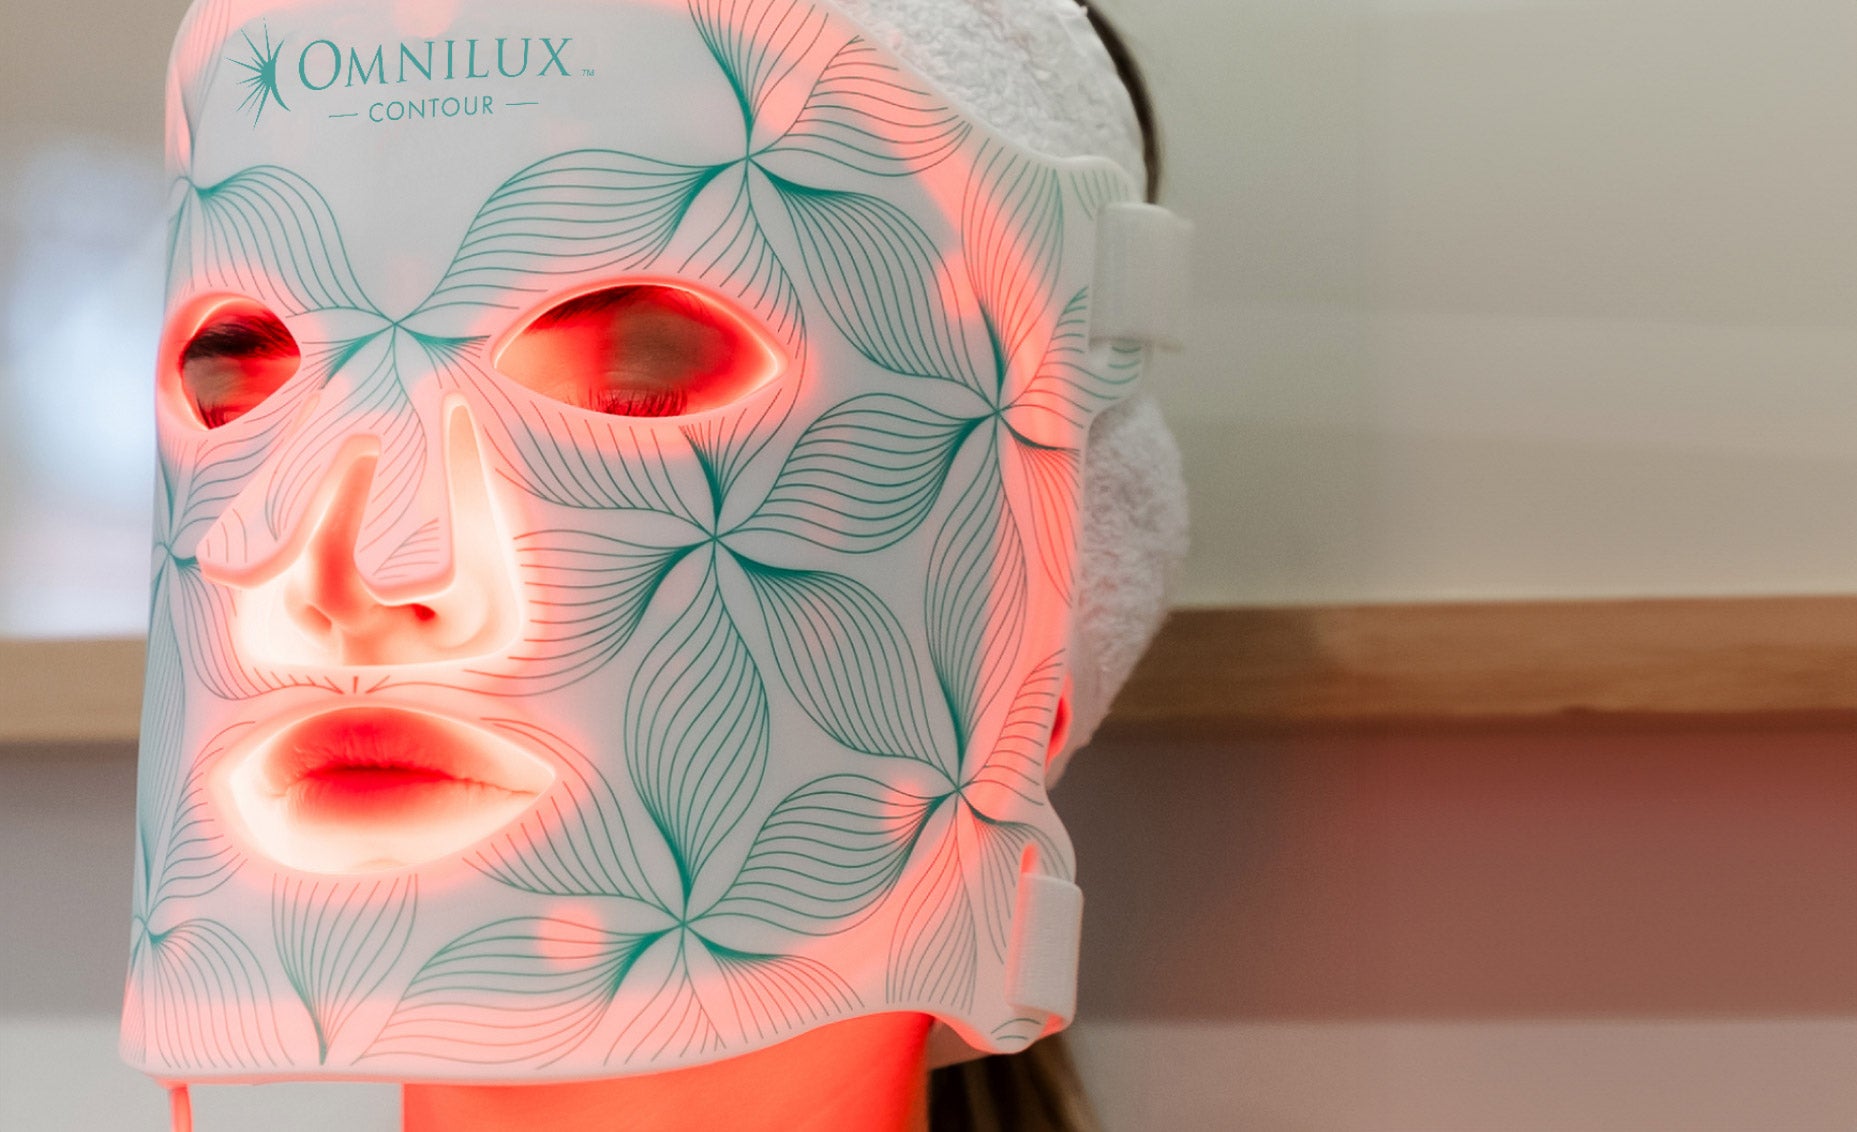 omnilux contour face - red light therapy device